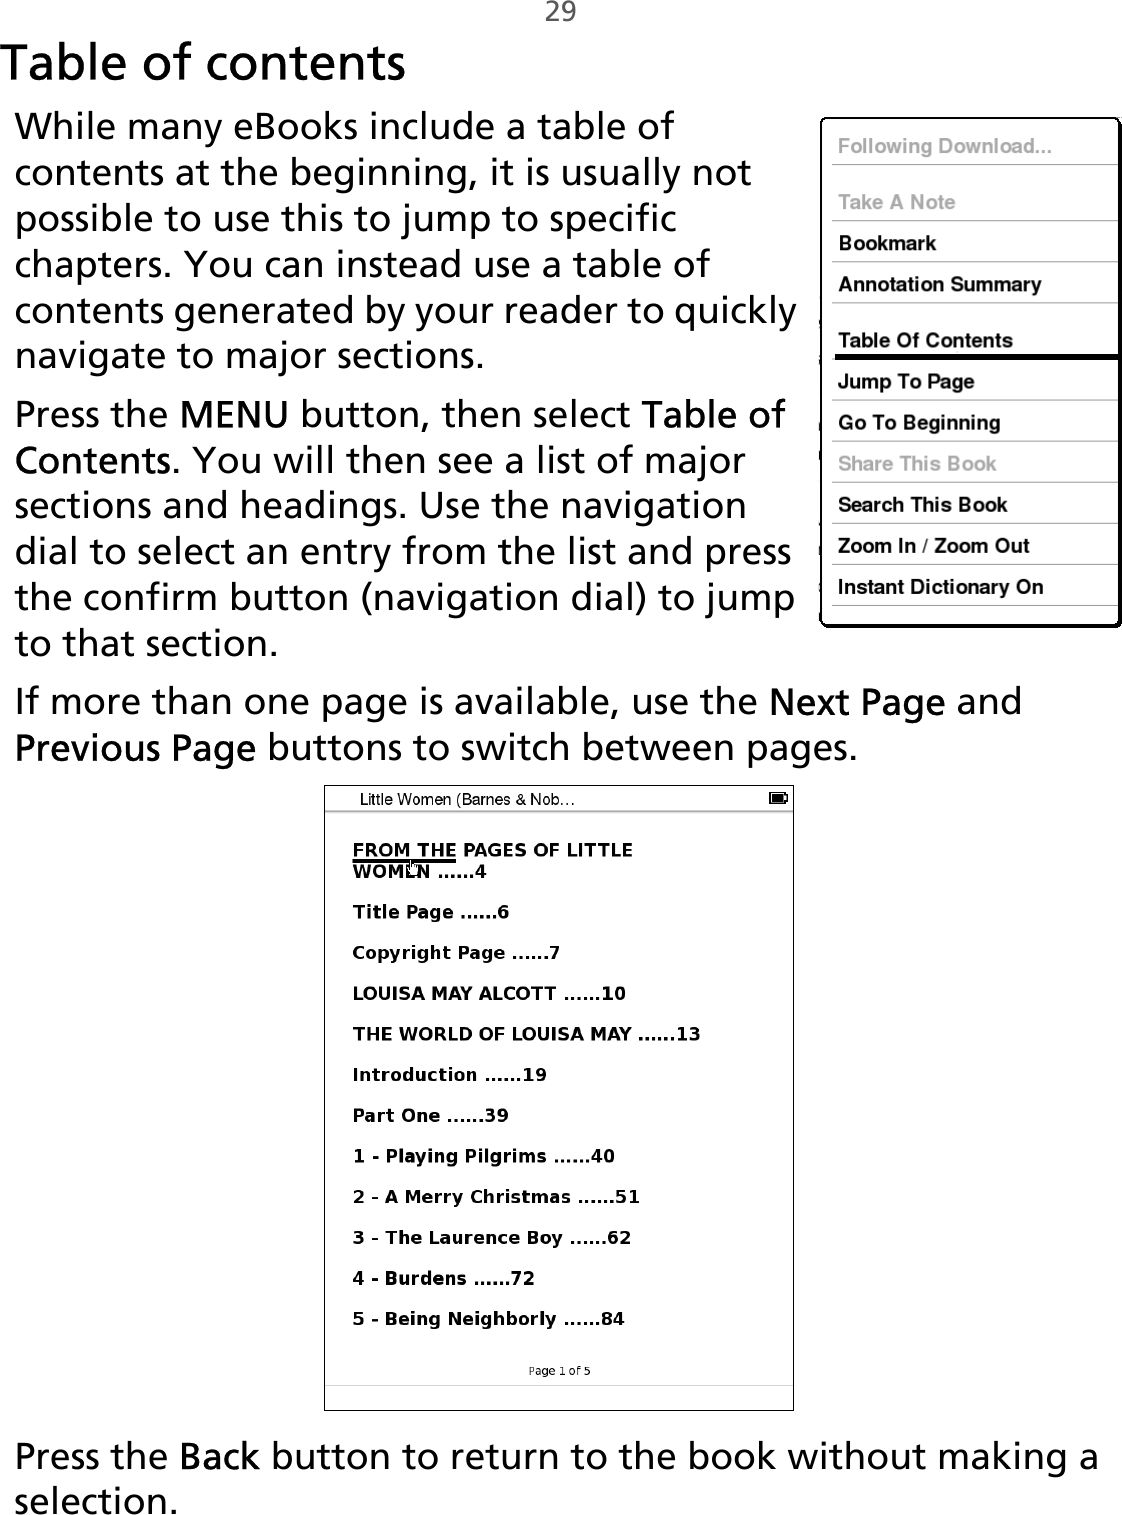 29Table of contentsWhile many eBooks include a table of contents at the beginning, it is usually not possible to use this to jump to specific chapters. You can instead use a table of contents generated by your reader to quickly navigate to major sections.Press the MENU button, then select Table of Contents. You will then see a list of major sections and headings. Use the navigation dial to select an entry from the list and press the confirm button (navigation dial) to jump to that section. If more than one page is available, use the Next Page and Previous Page buttons to switch between pages.Press the Back button to return to the book without making a selection.